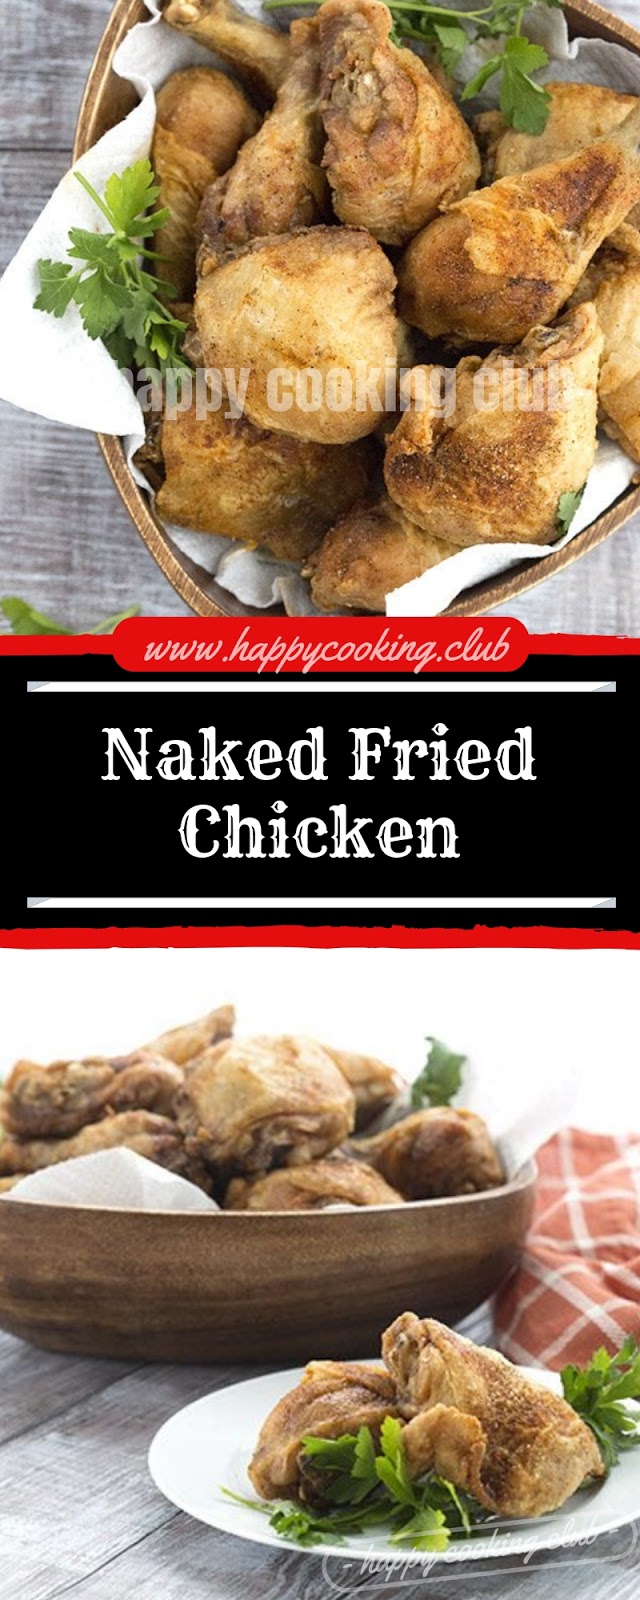 Naked Fried Chicken